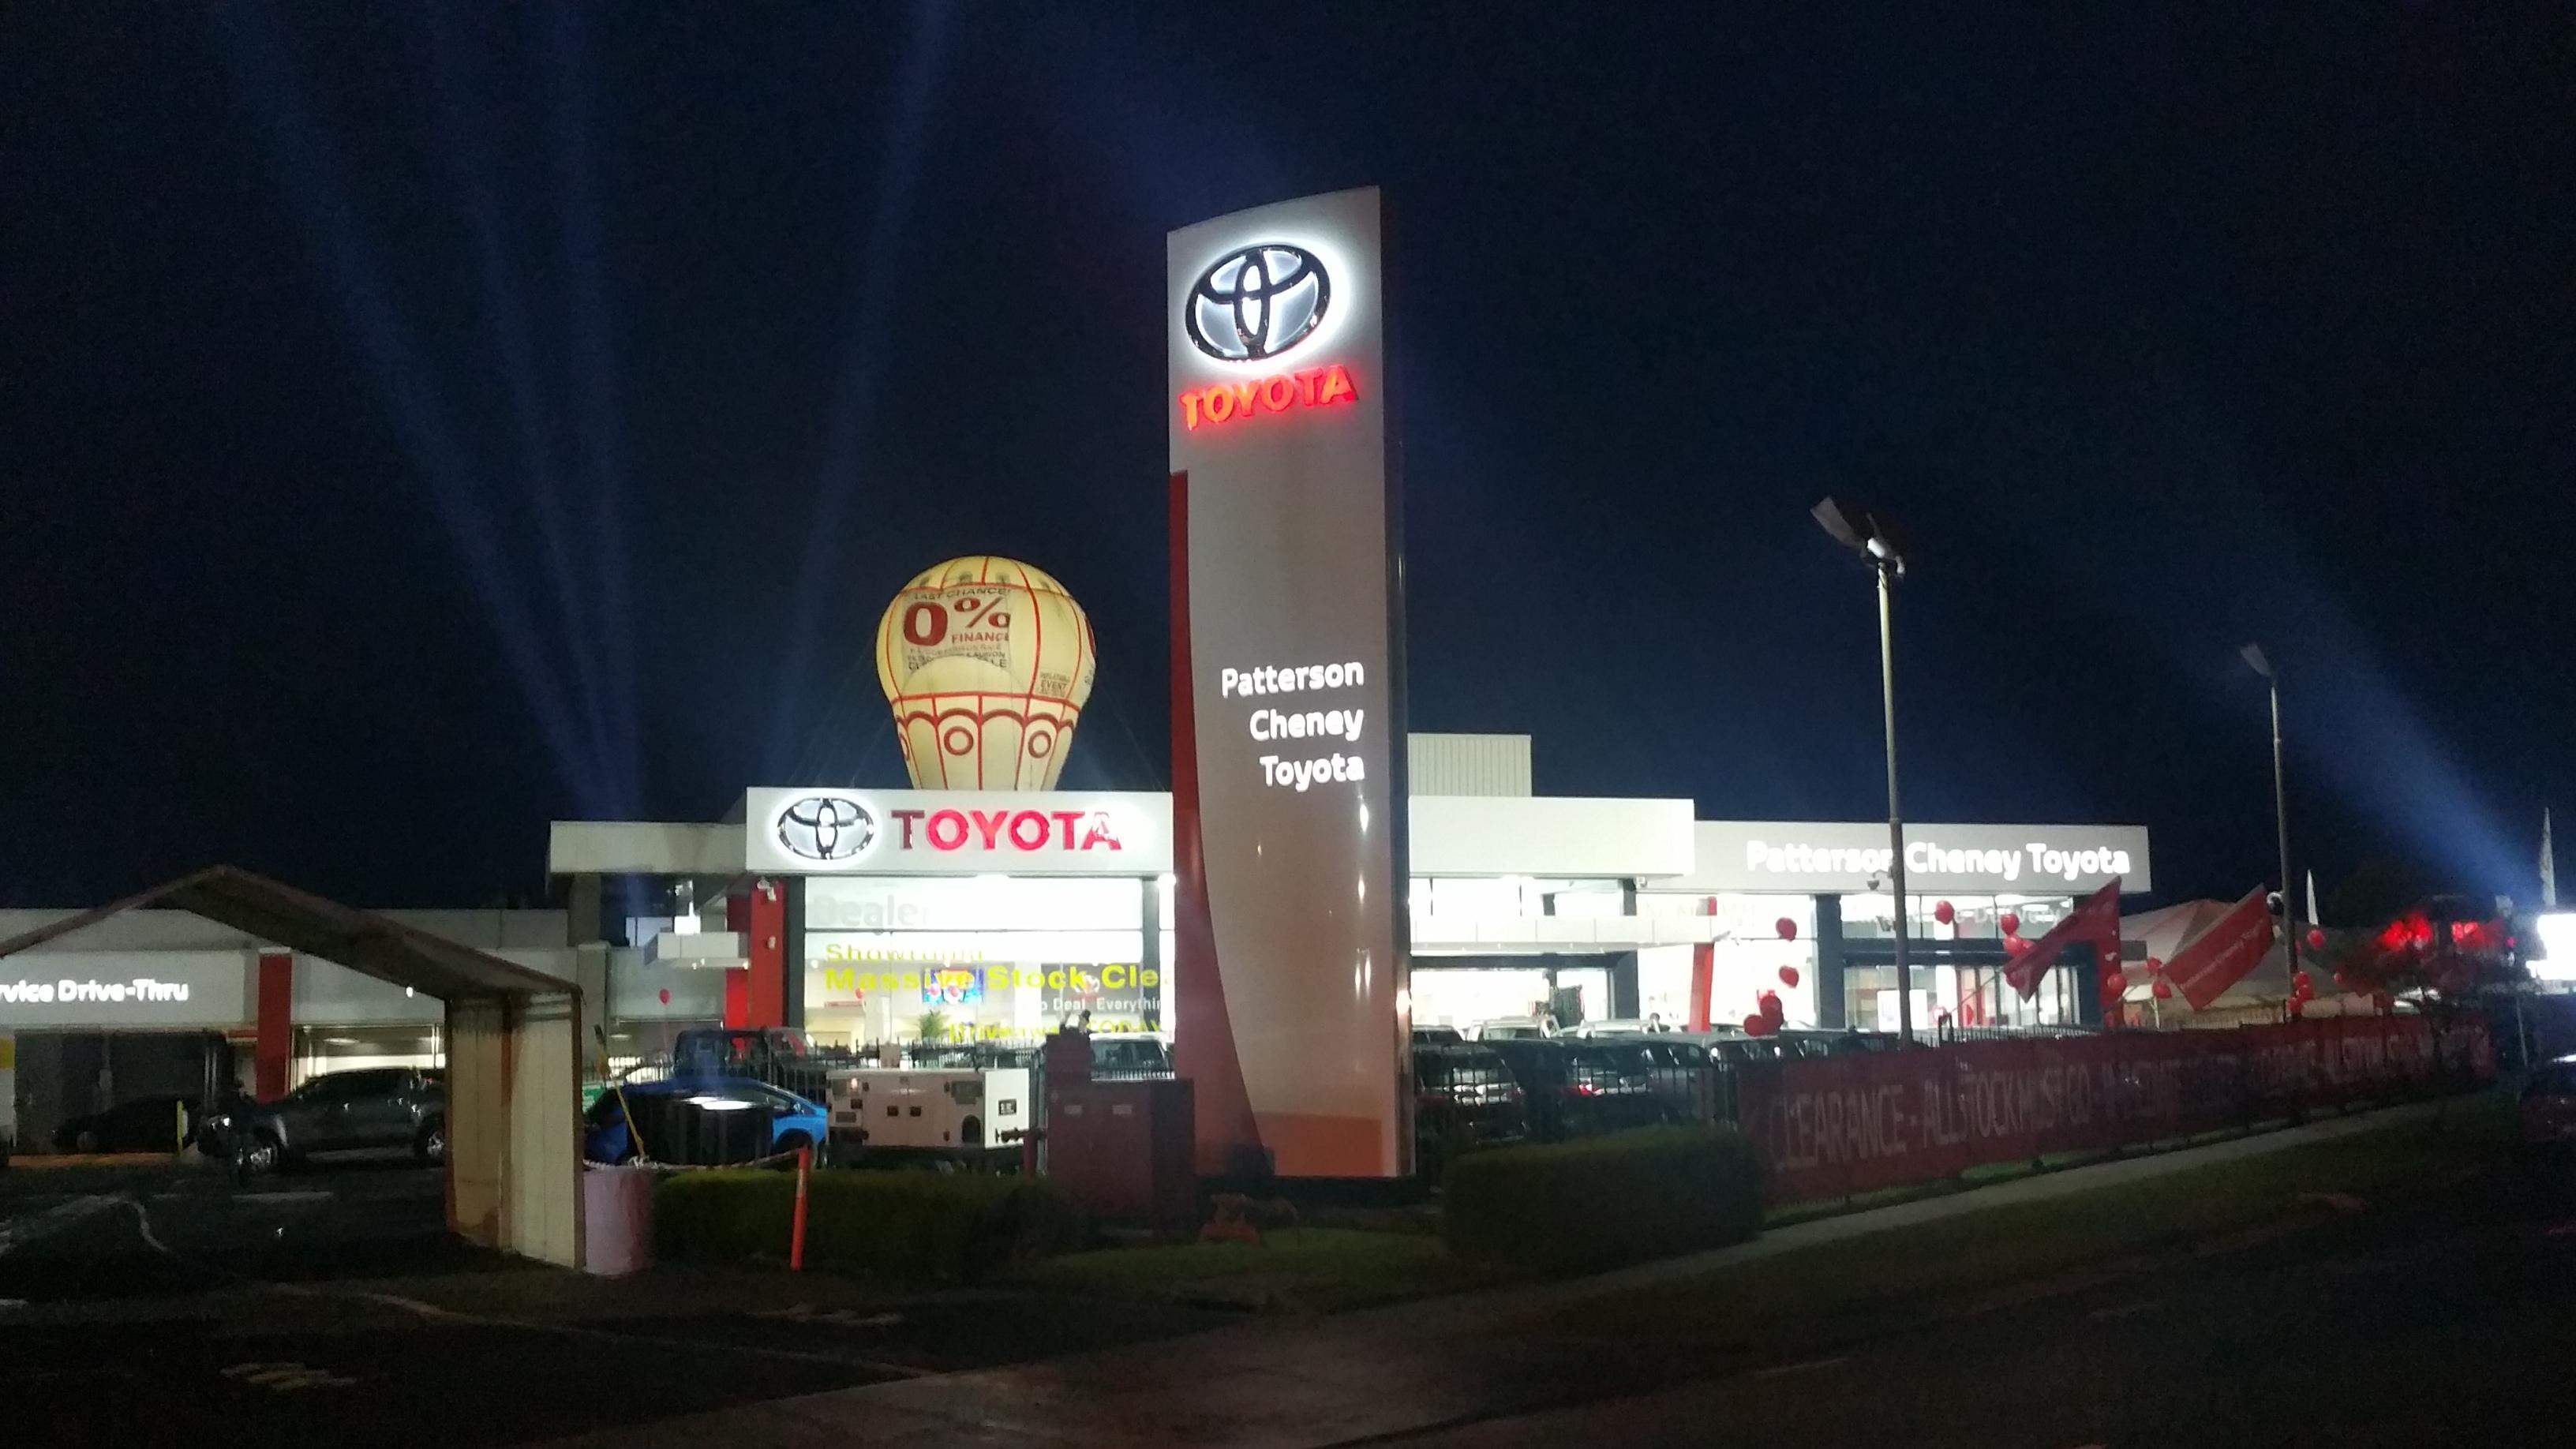 Patterson Cheney Toyota Used Cars Car Dealership carsguide